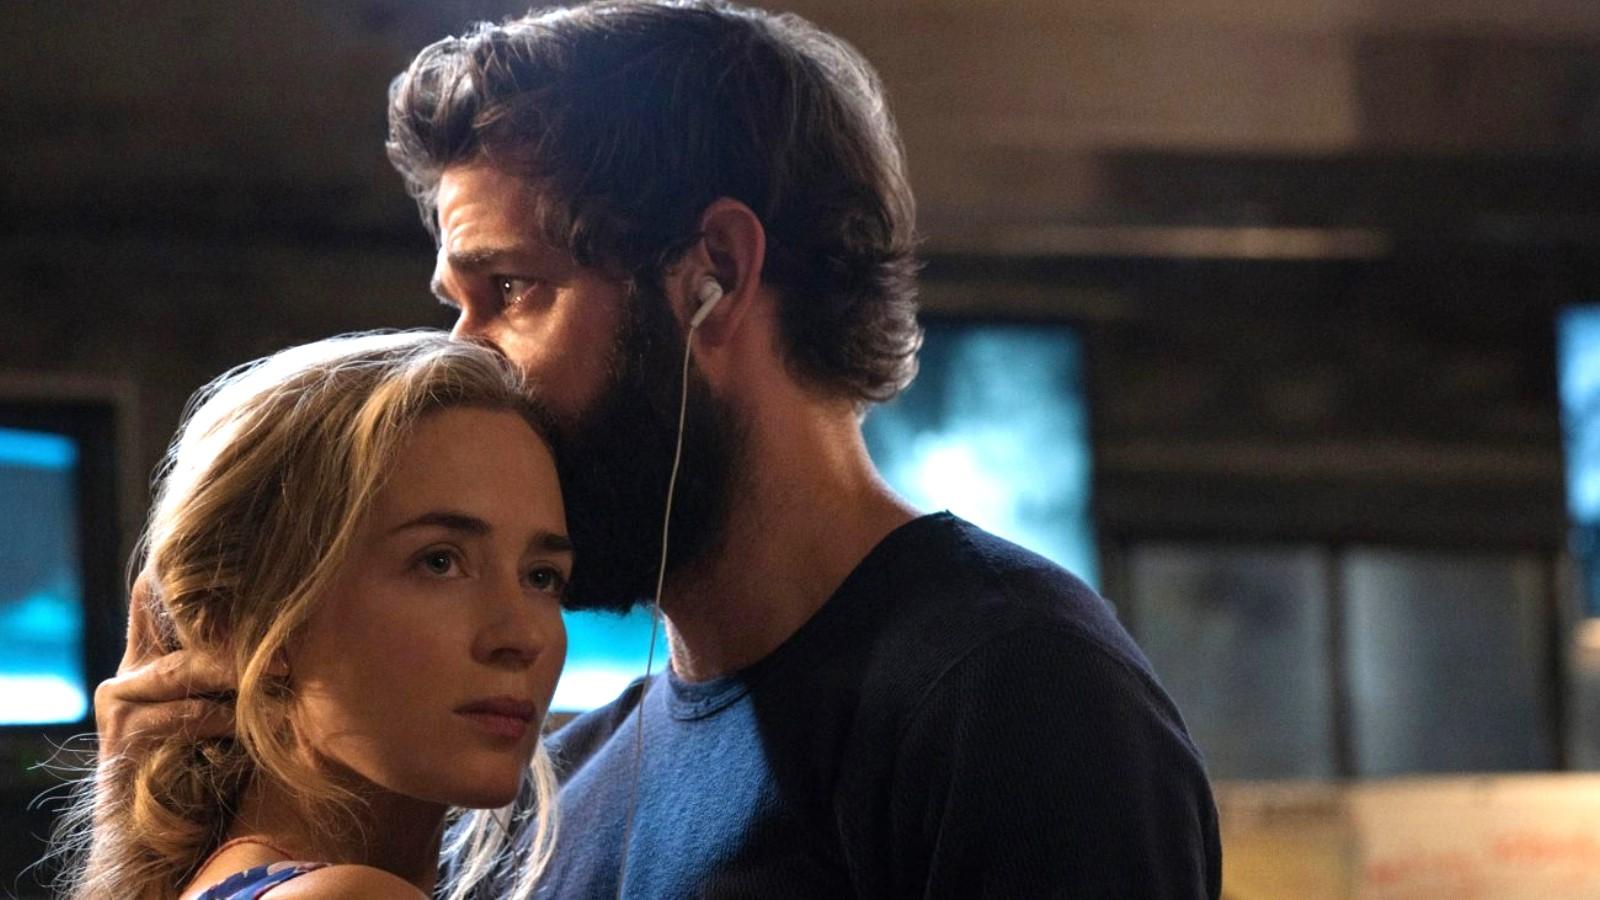 Are John Krasinski and Emily Blunt in A Quiet Place: Day One?